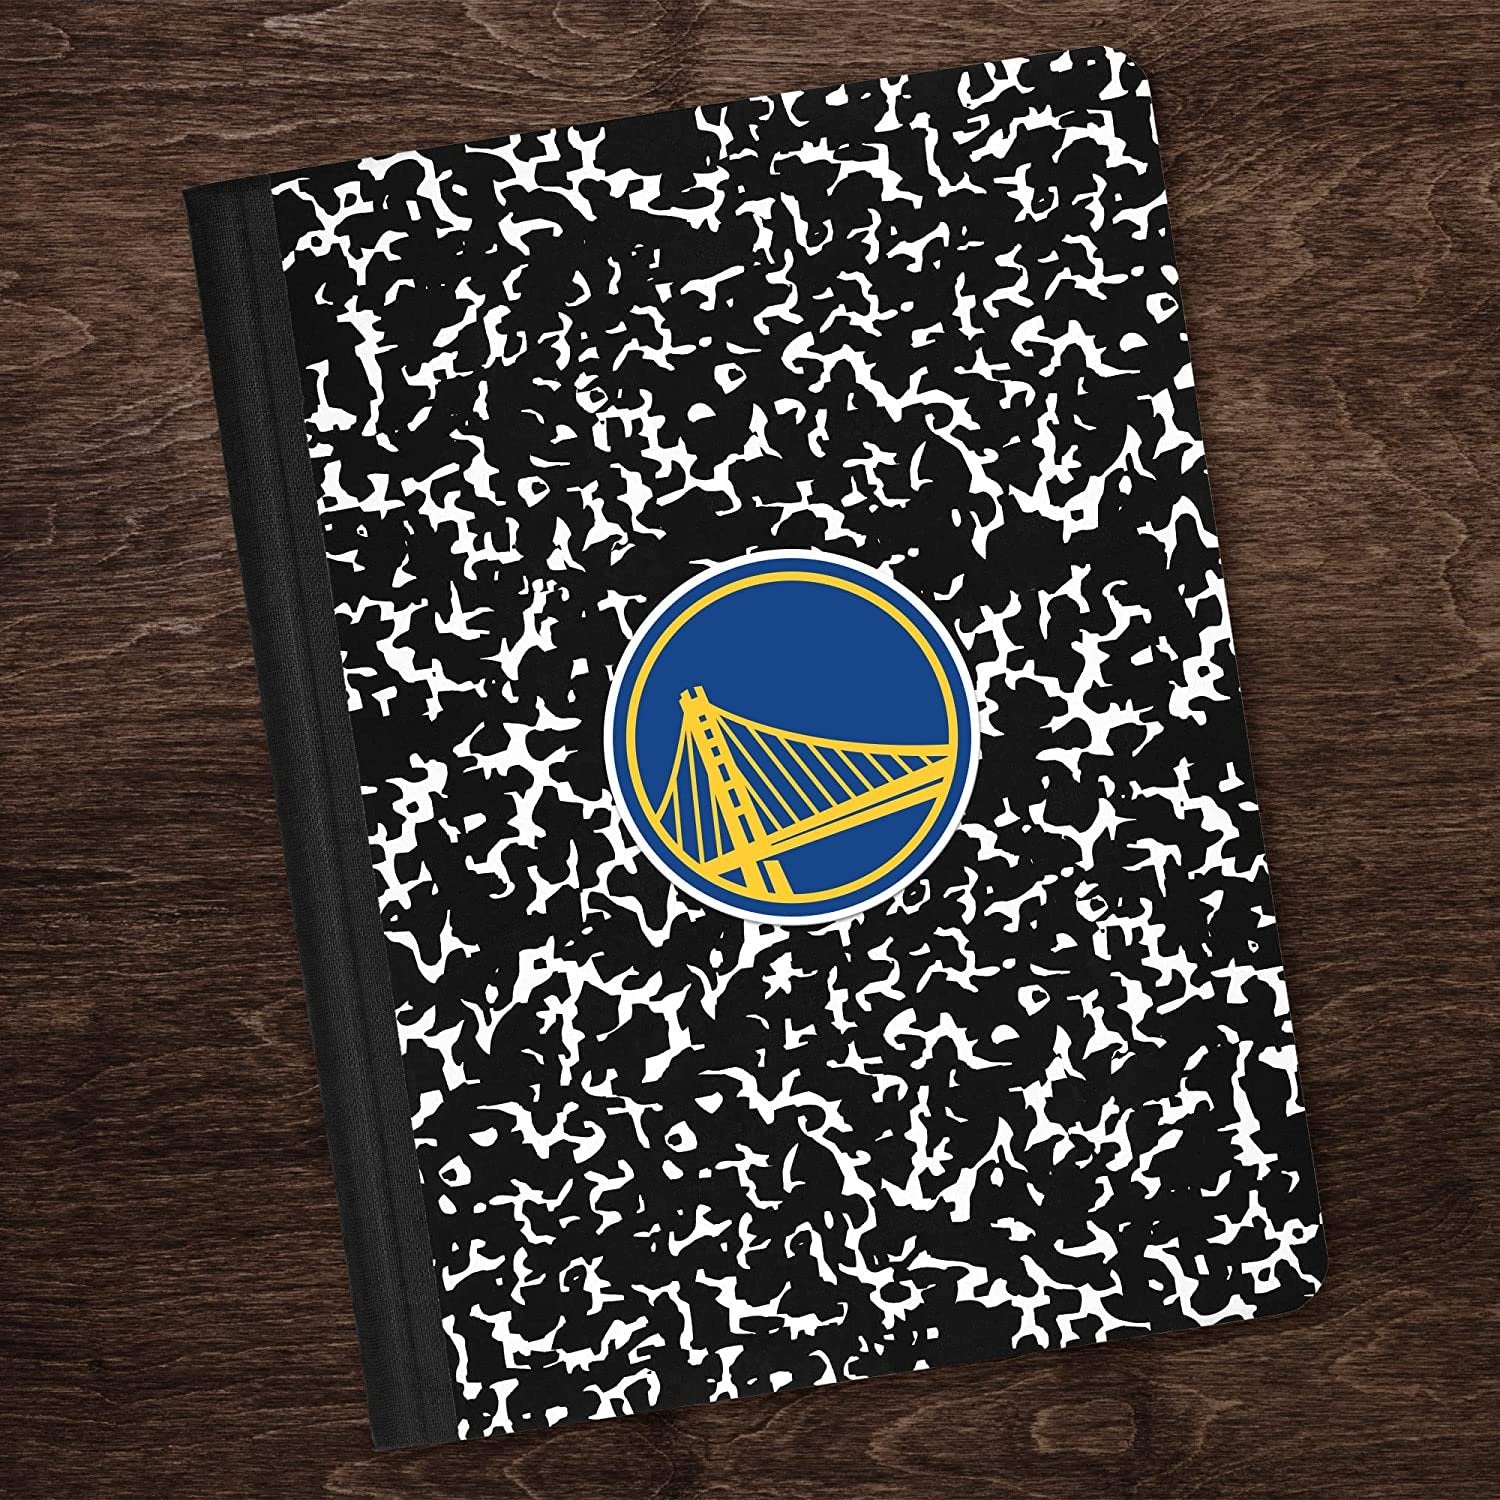 Golden State Warriors 4x4 Die Cut Inch Decal Sticker Flat Vinyl, Primary Logo, Clear Backing